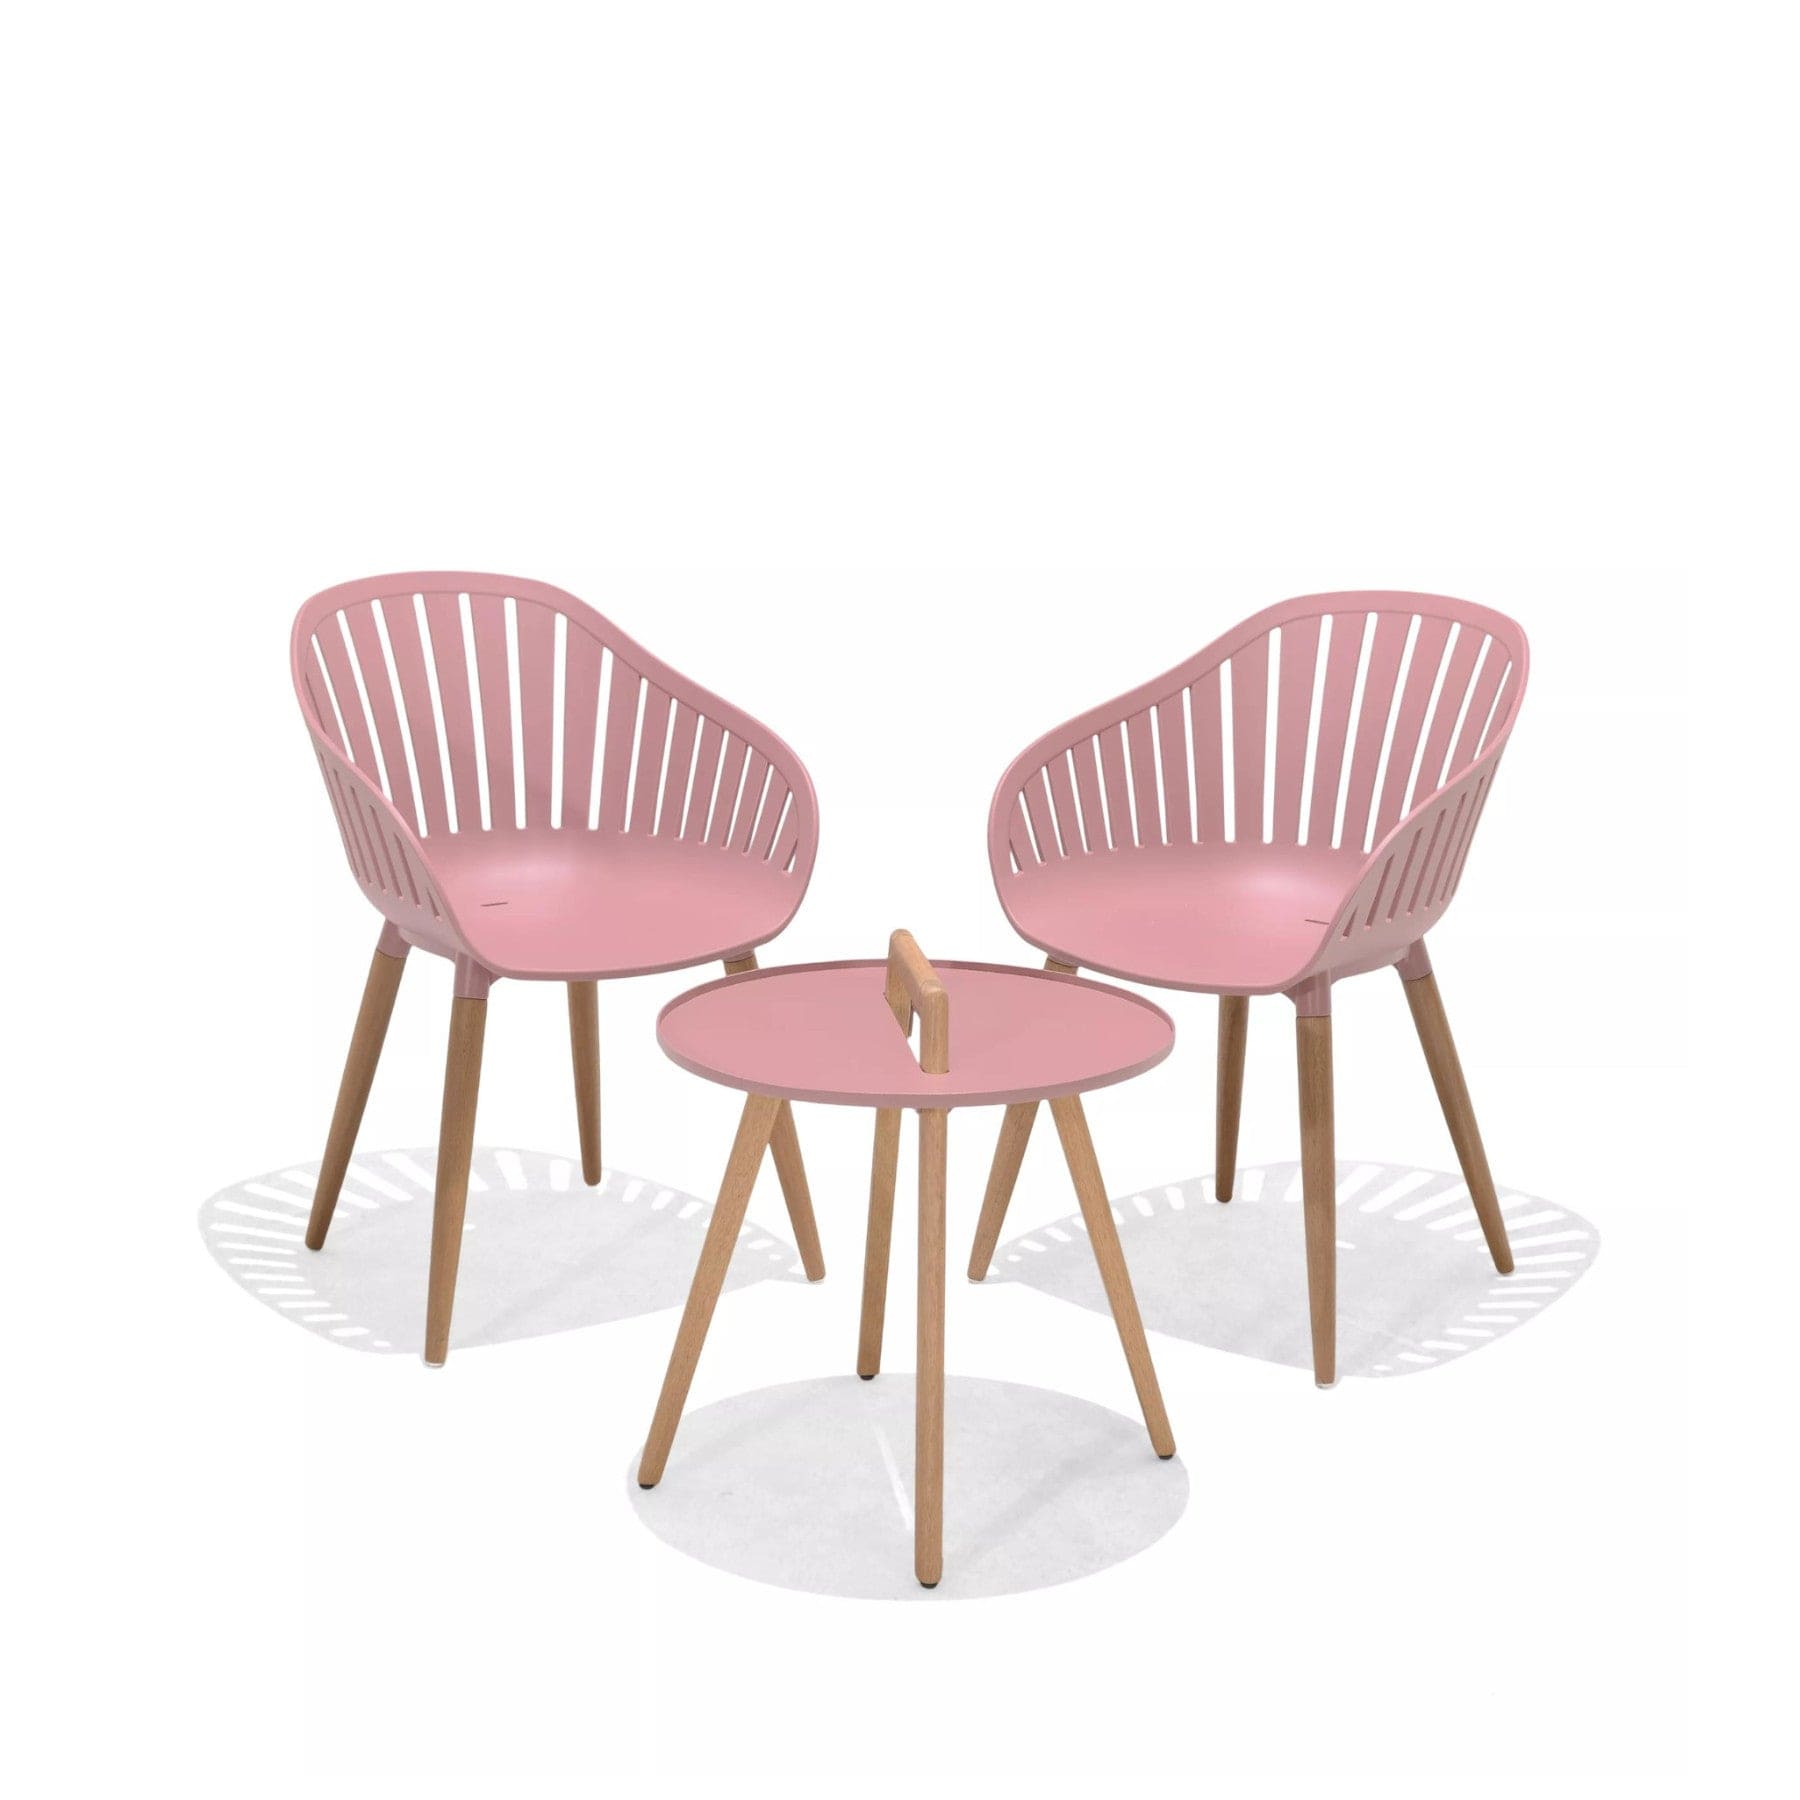 Two pink modern chairs with wooden legs and a matching round table on a white background